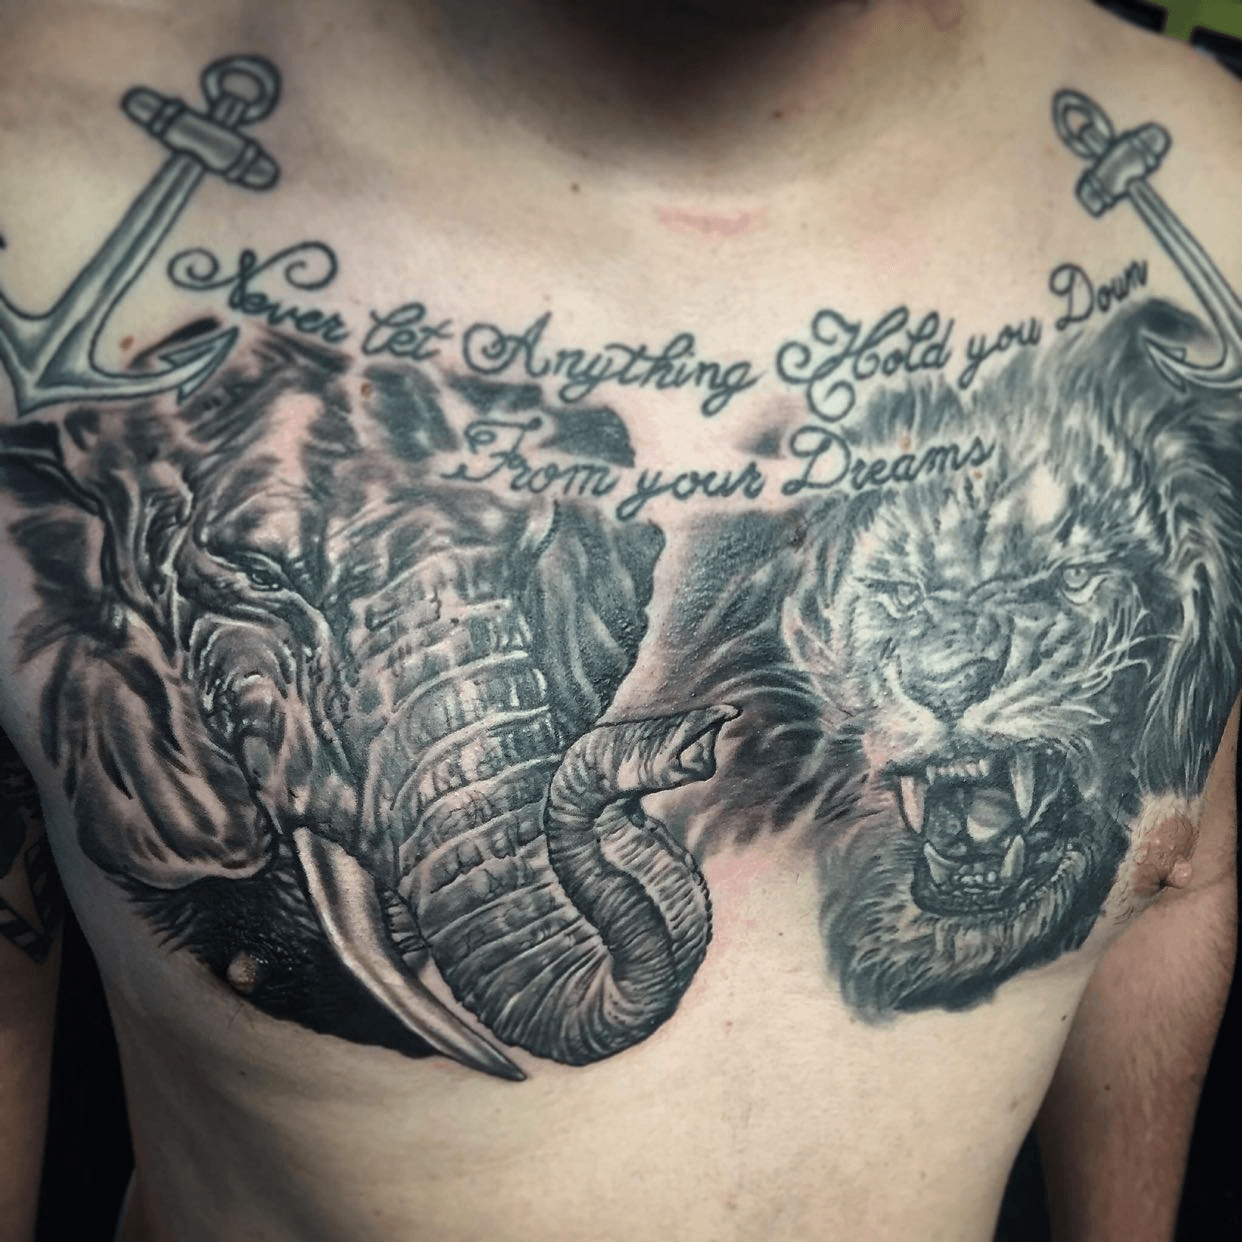 Top 71 Cool Chest Tattoo Ideas  2021 Inspiration Guide  Elephant tattoo  design Cool chest tattoos Chest tattoo elephant